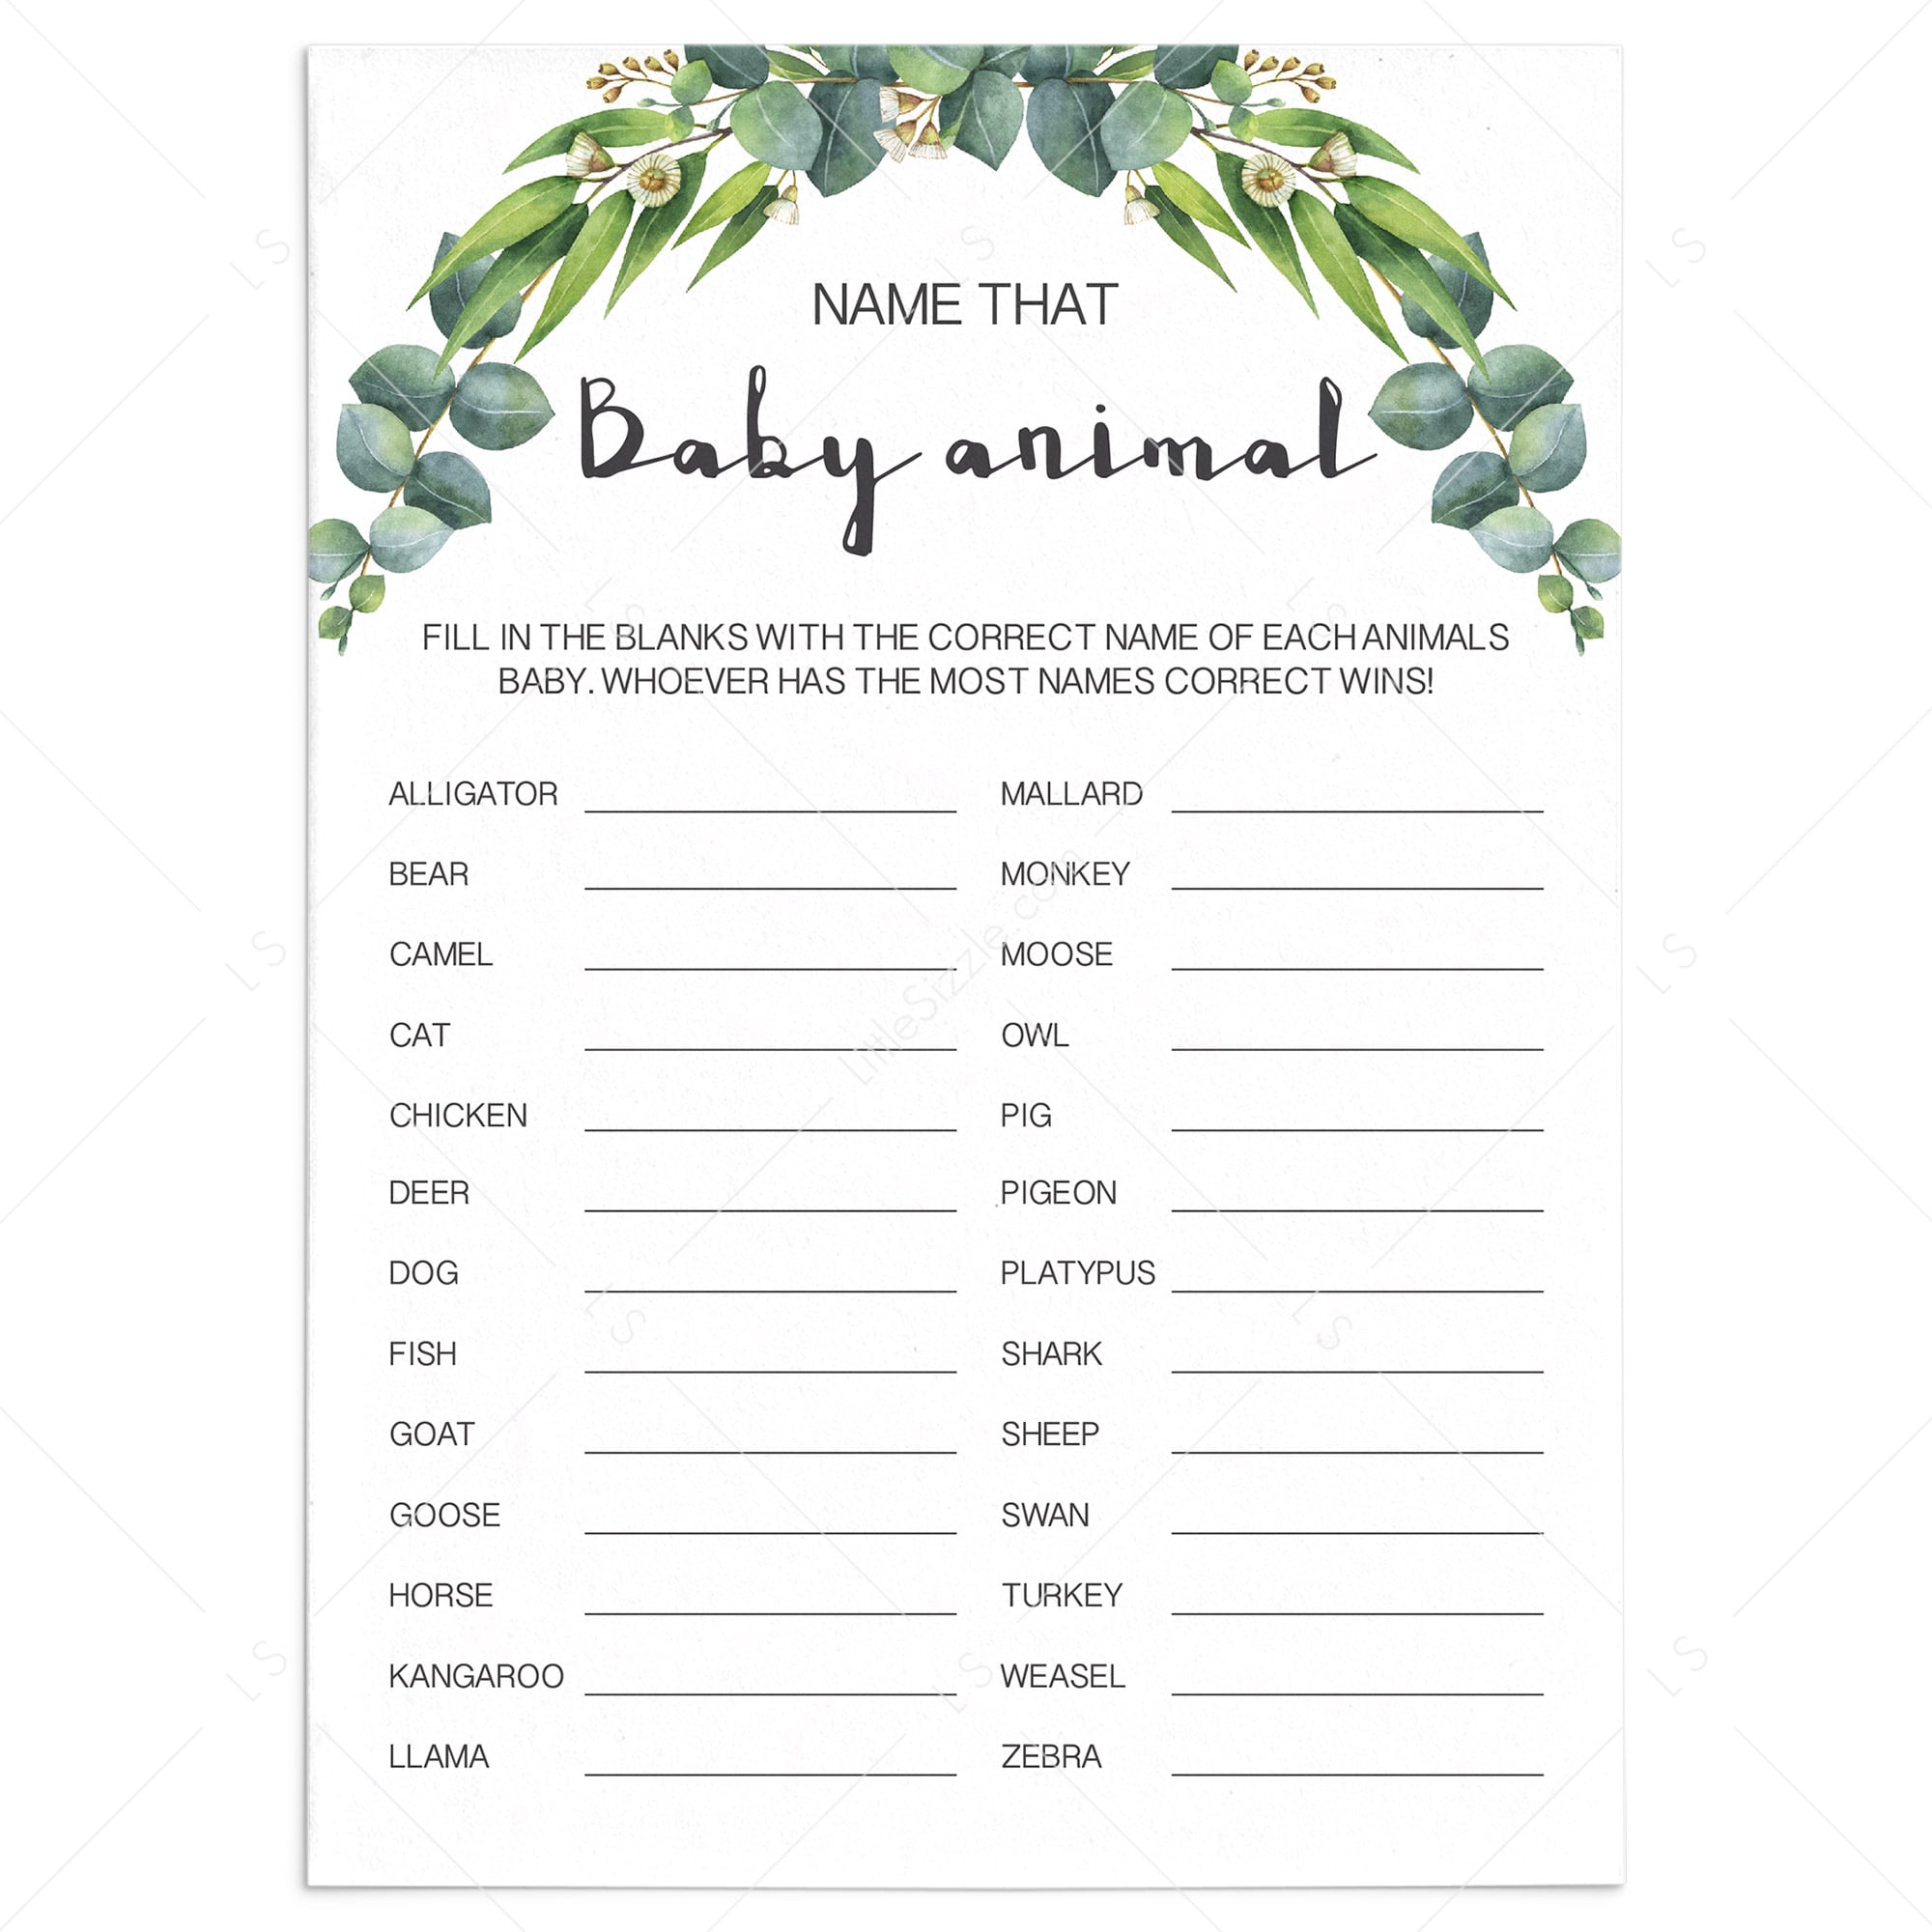 Name that baby animal game for green baby shower by LittleSizzle